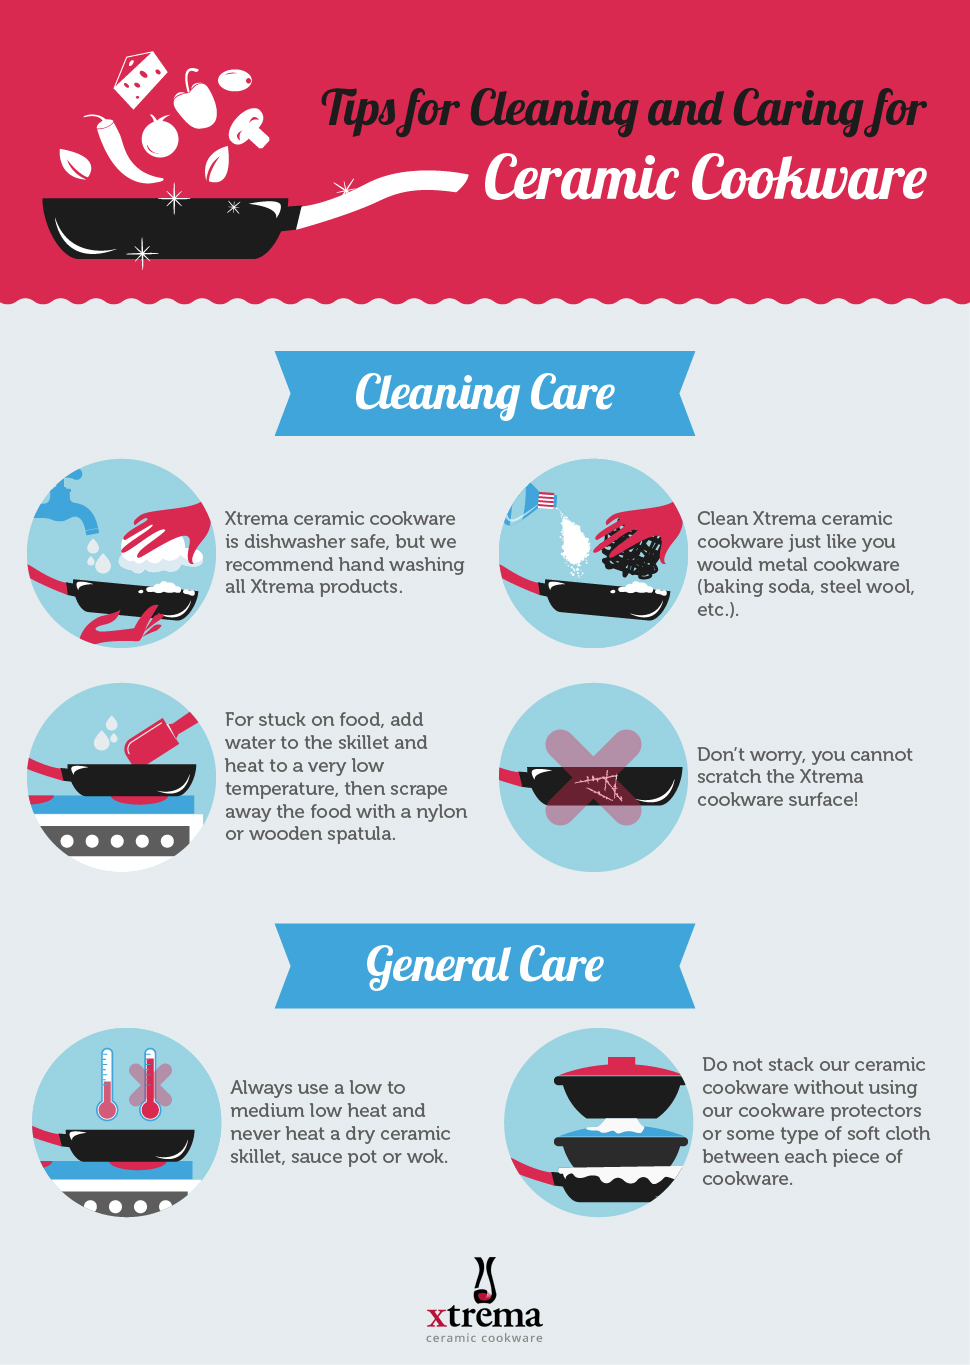 Tips for Cleaning and Caring for Ceramic Cookware